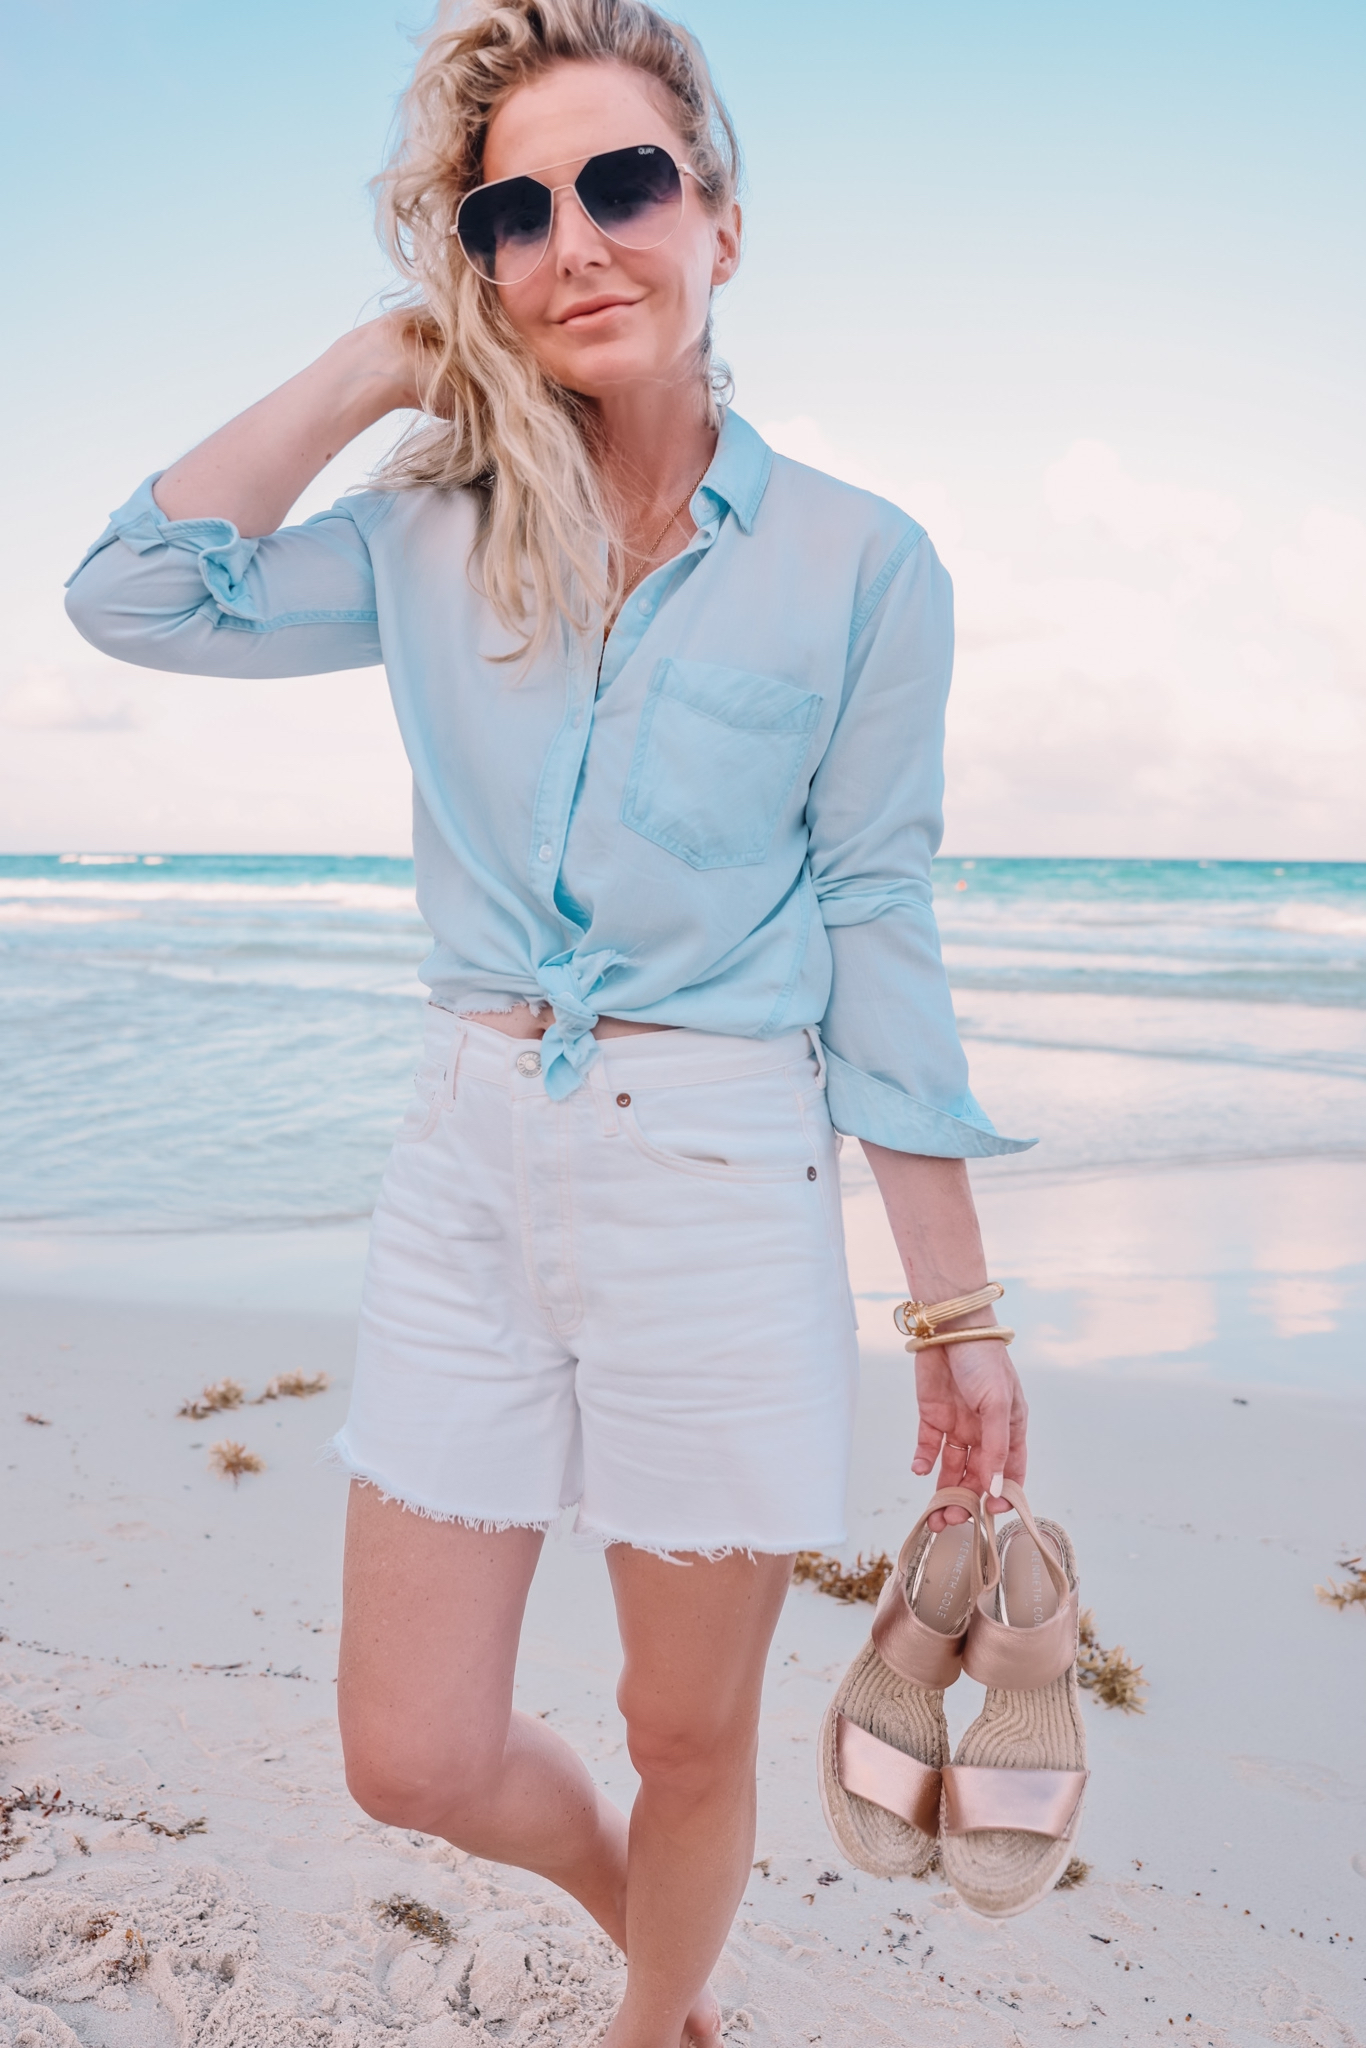 button down shirts, rails button down, chambray shirt, rails chambray shirt, white agolde jean shorts, white agolde denim shorts, denim shorts over 40, how to wear a button down, button down shirts for summer, best button down shirts, blouses that cover arms